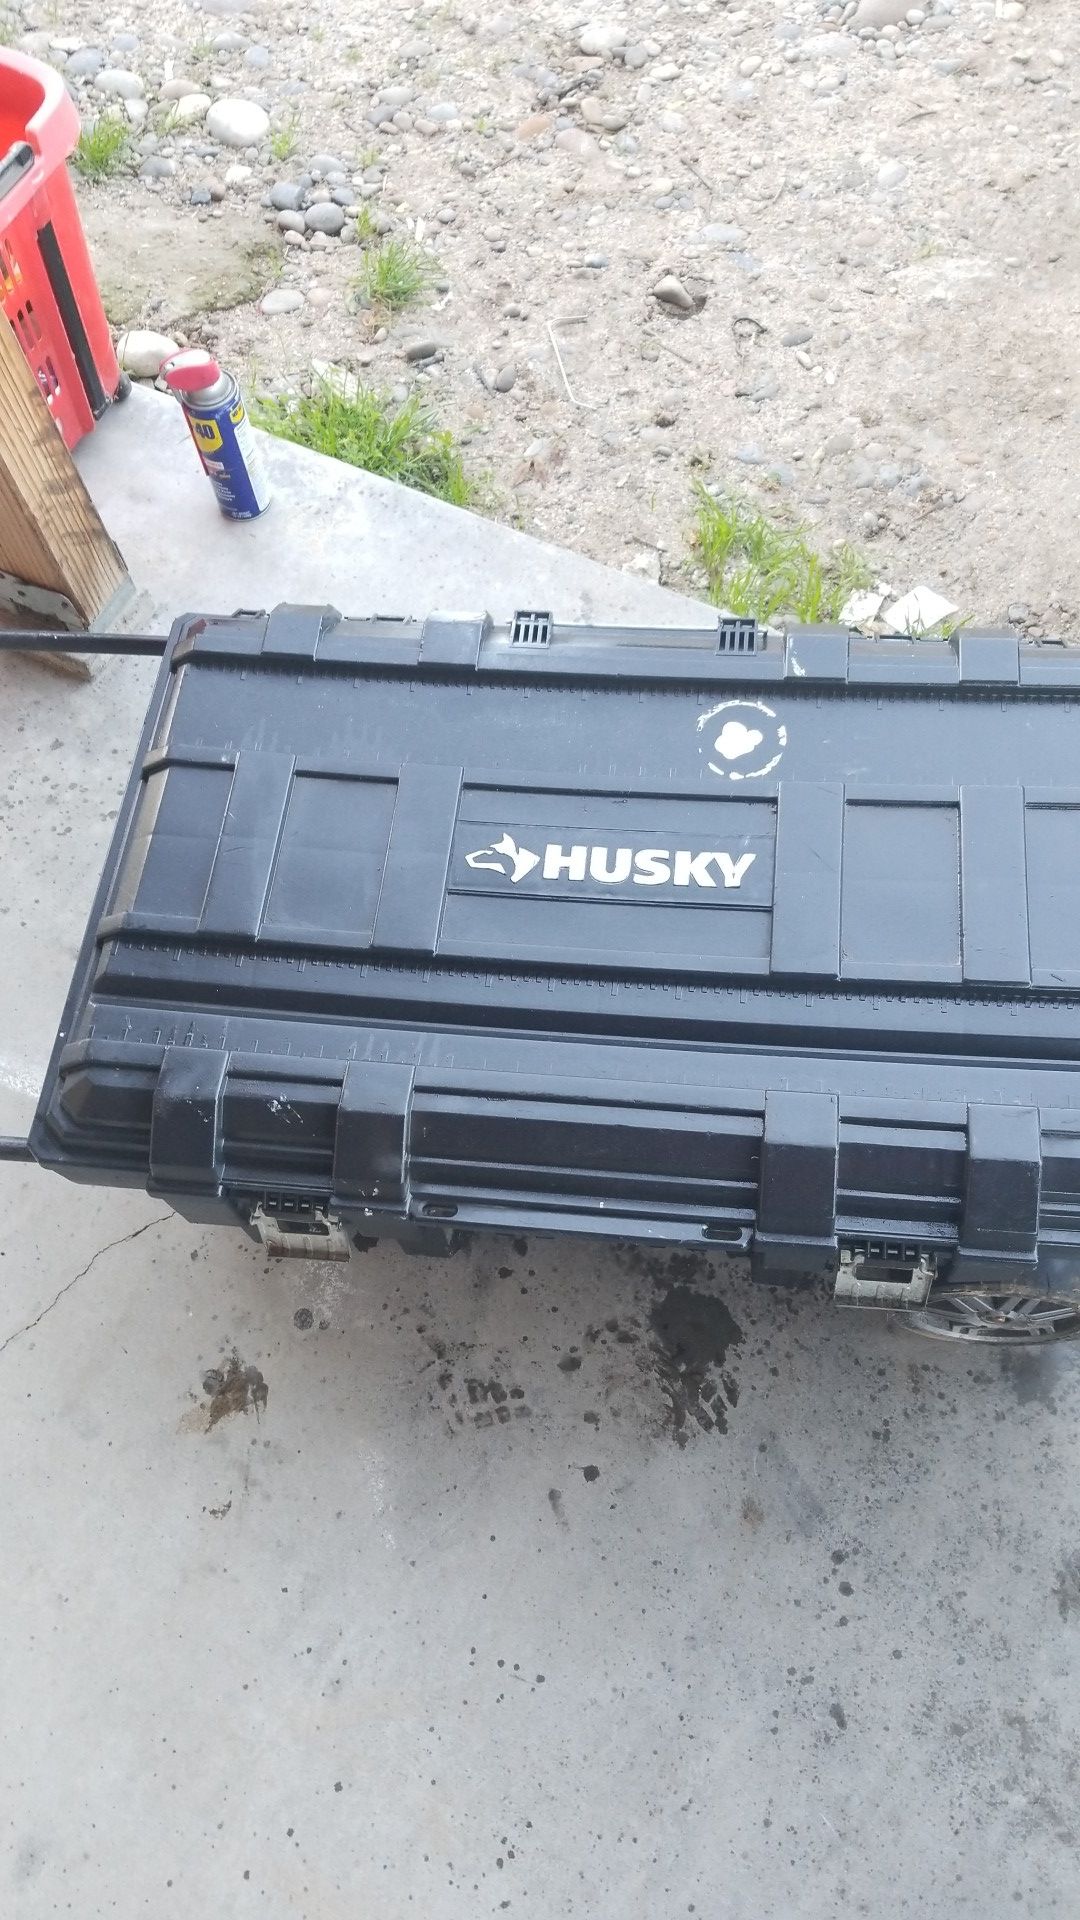 Huskey storage container